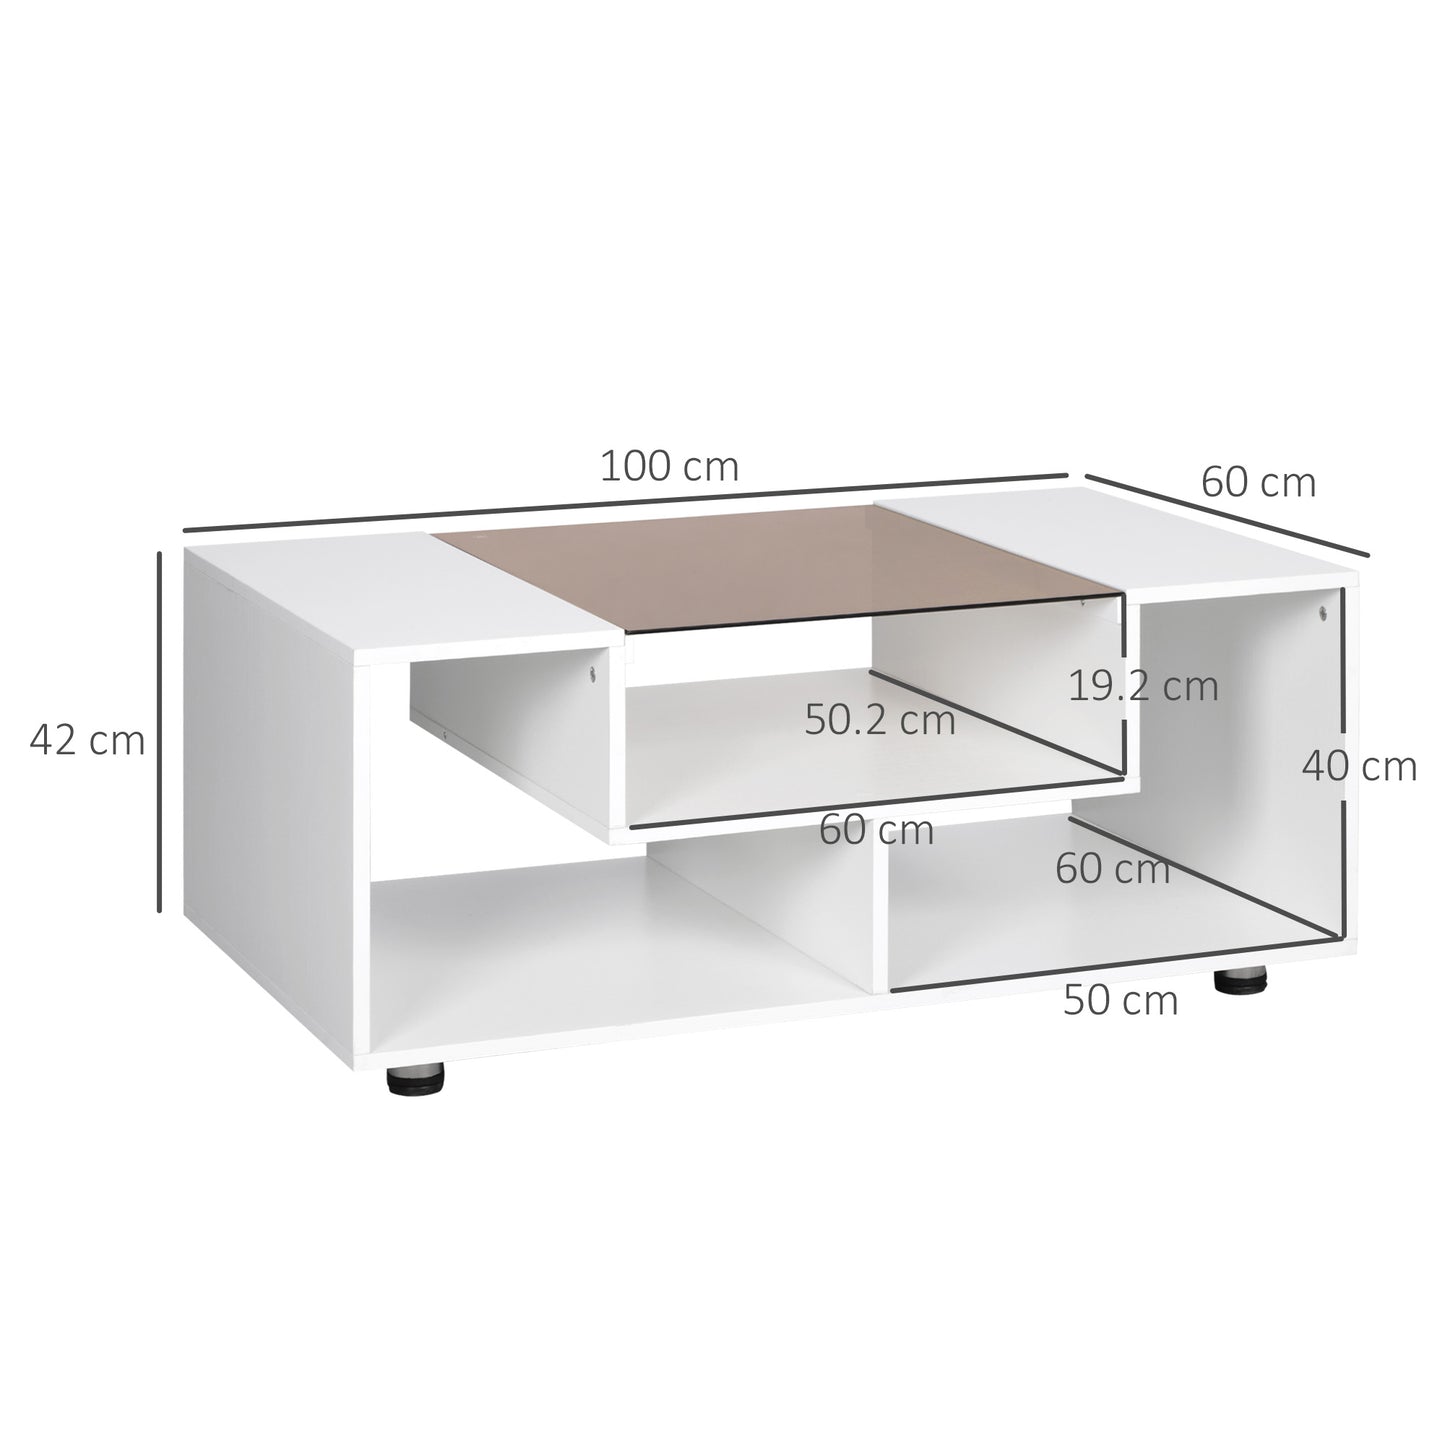 HOMCOM Modern Coffee Table with Tempered Glass Top, Cocktail Table with 3-Tier Storage Shelves for Living Room, White